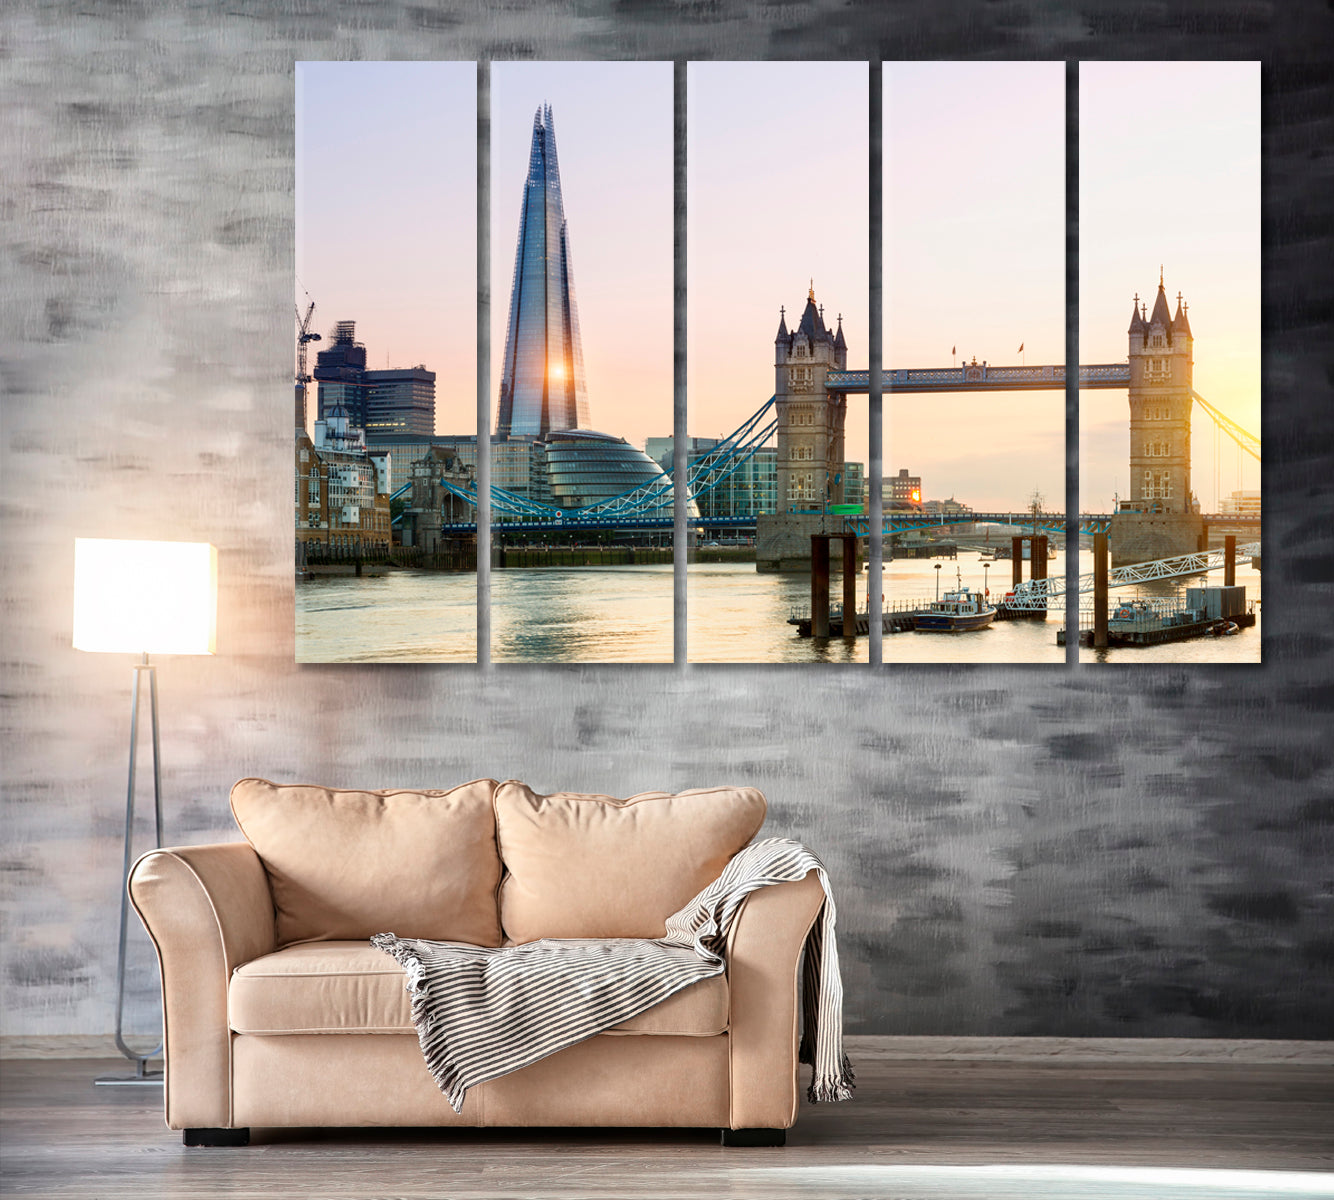 Shard and Tower Bridge London Canvas Print ArtLexy 5 Panels 36"x24" inches 